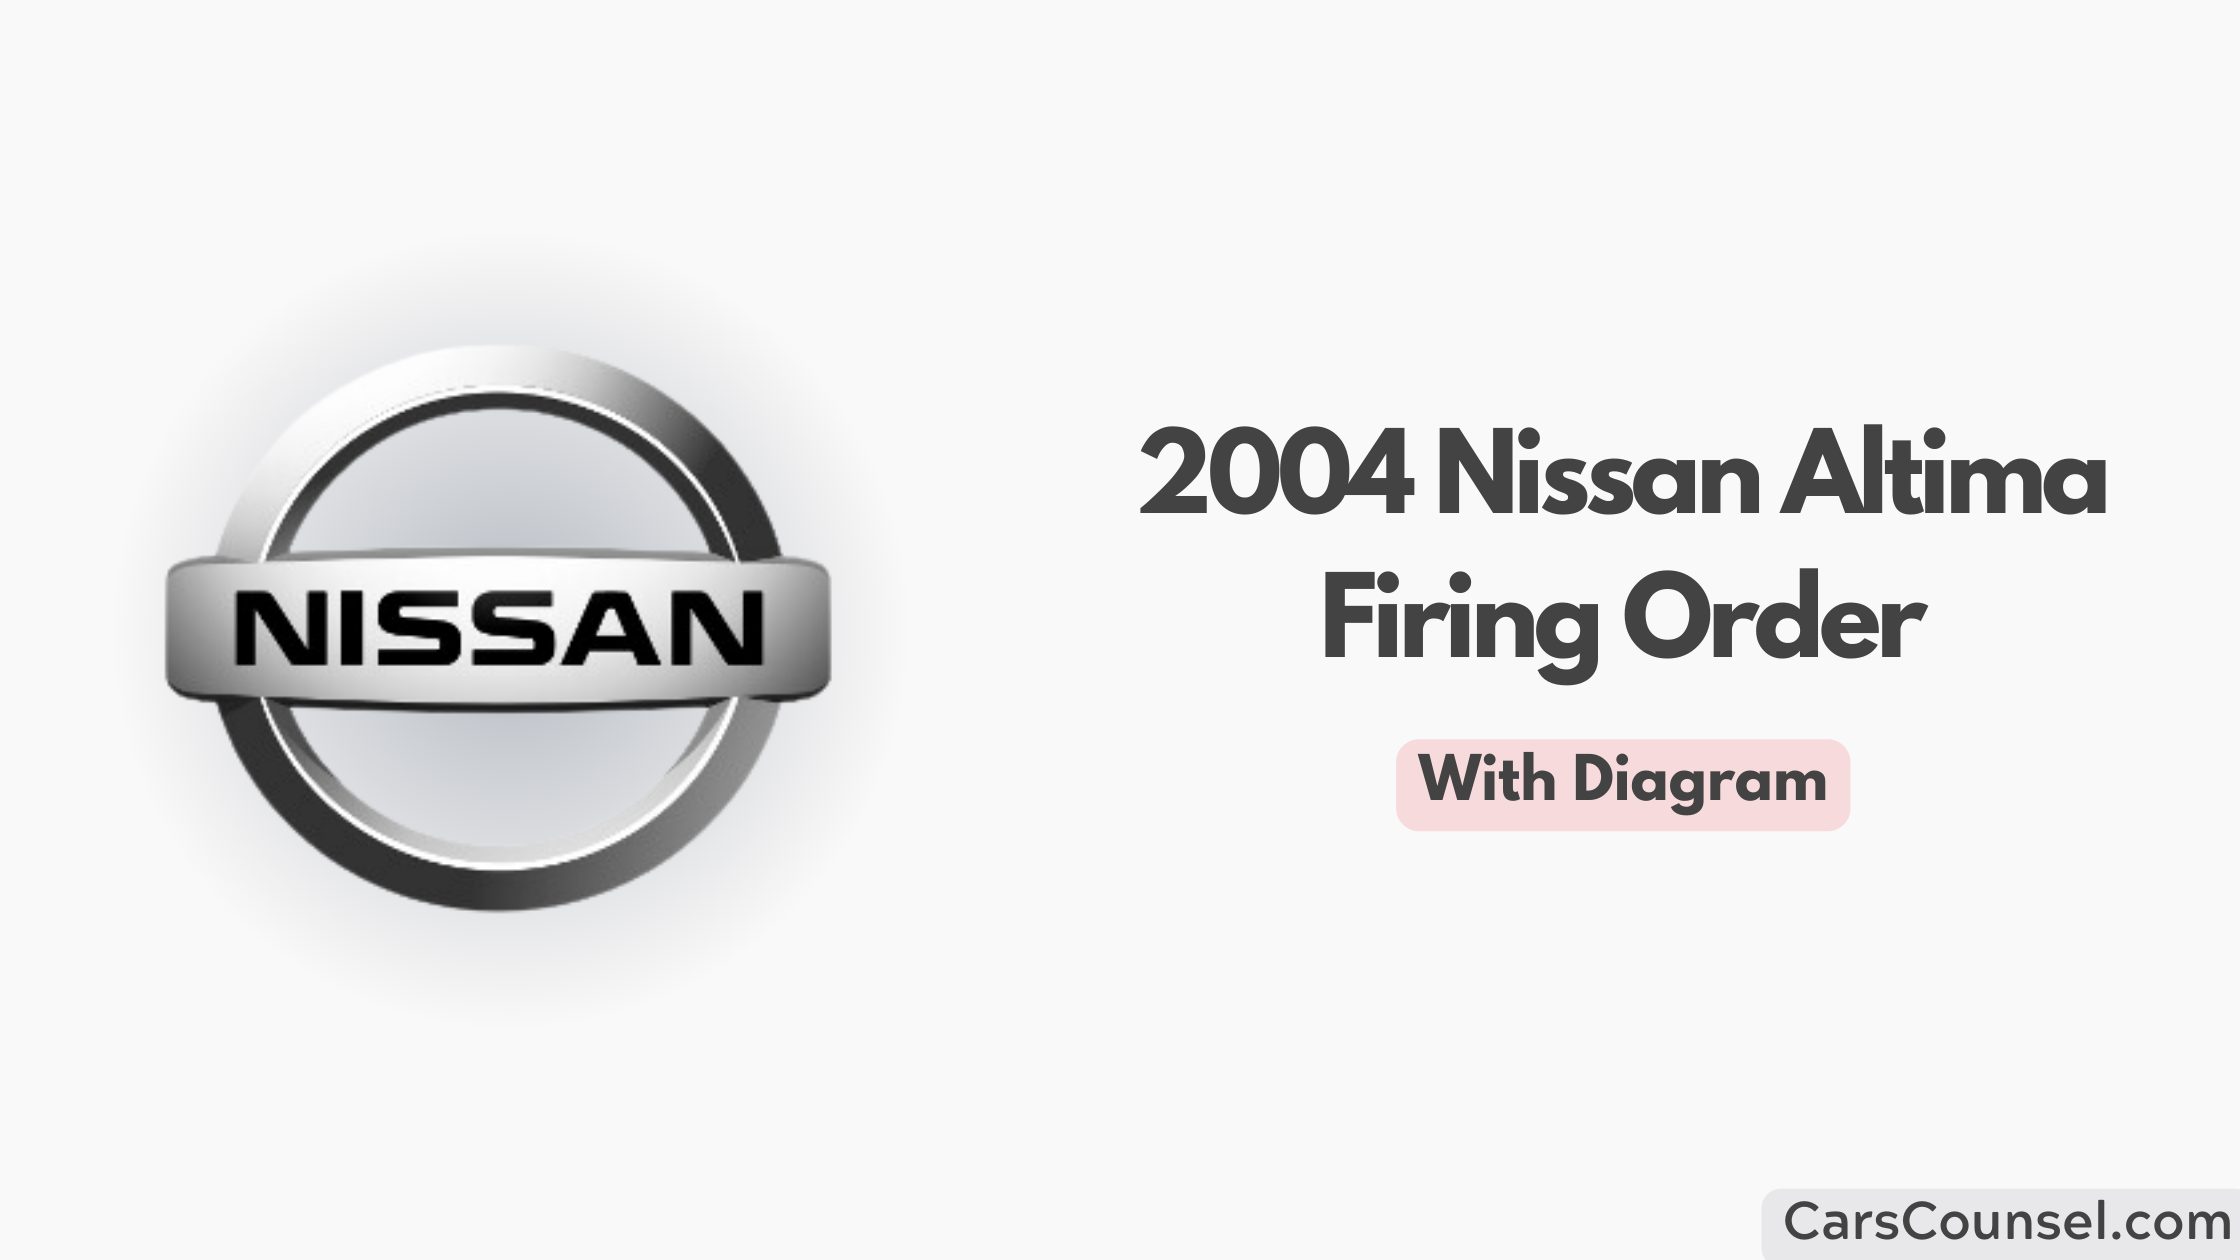 2004 Nissan Altima Firing Order With Diagram